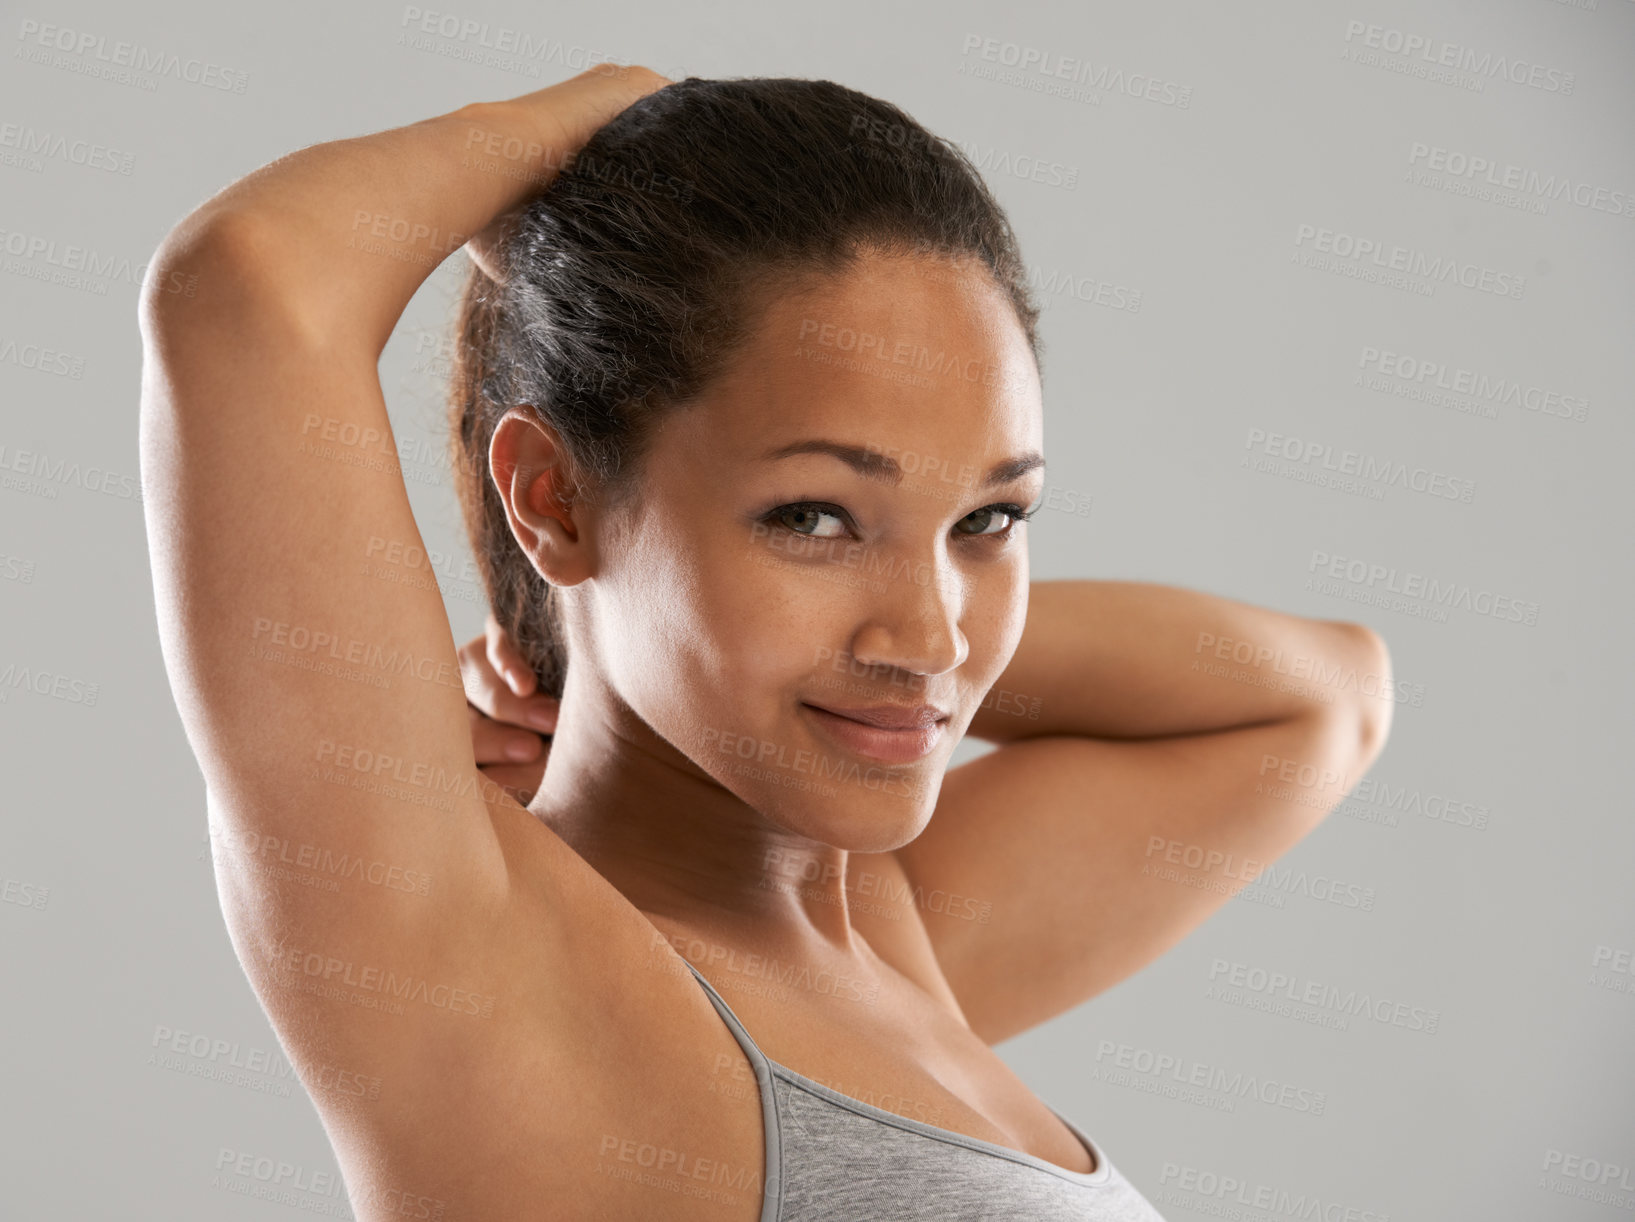 Buy stock photo Fitness, tie hair or portrait of happy woman isolated on grey background for wellness or sports. Smile, female athlete or person with hairstyle ready to start exercise, training or workout in studio